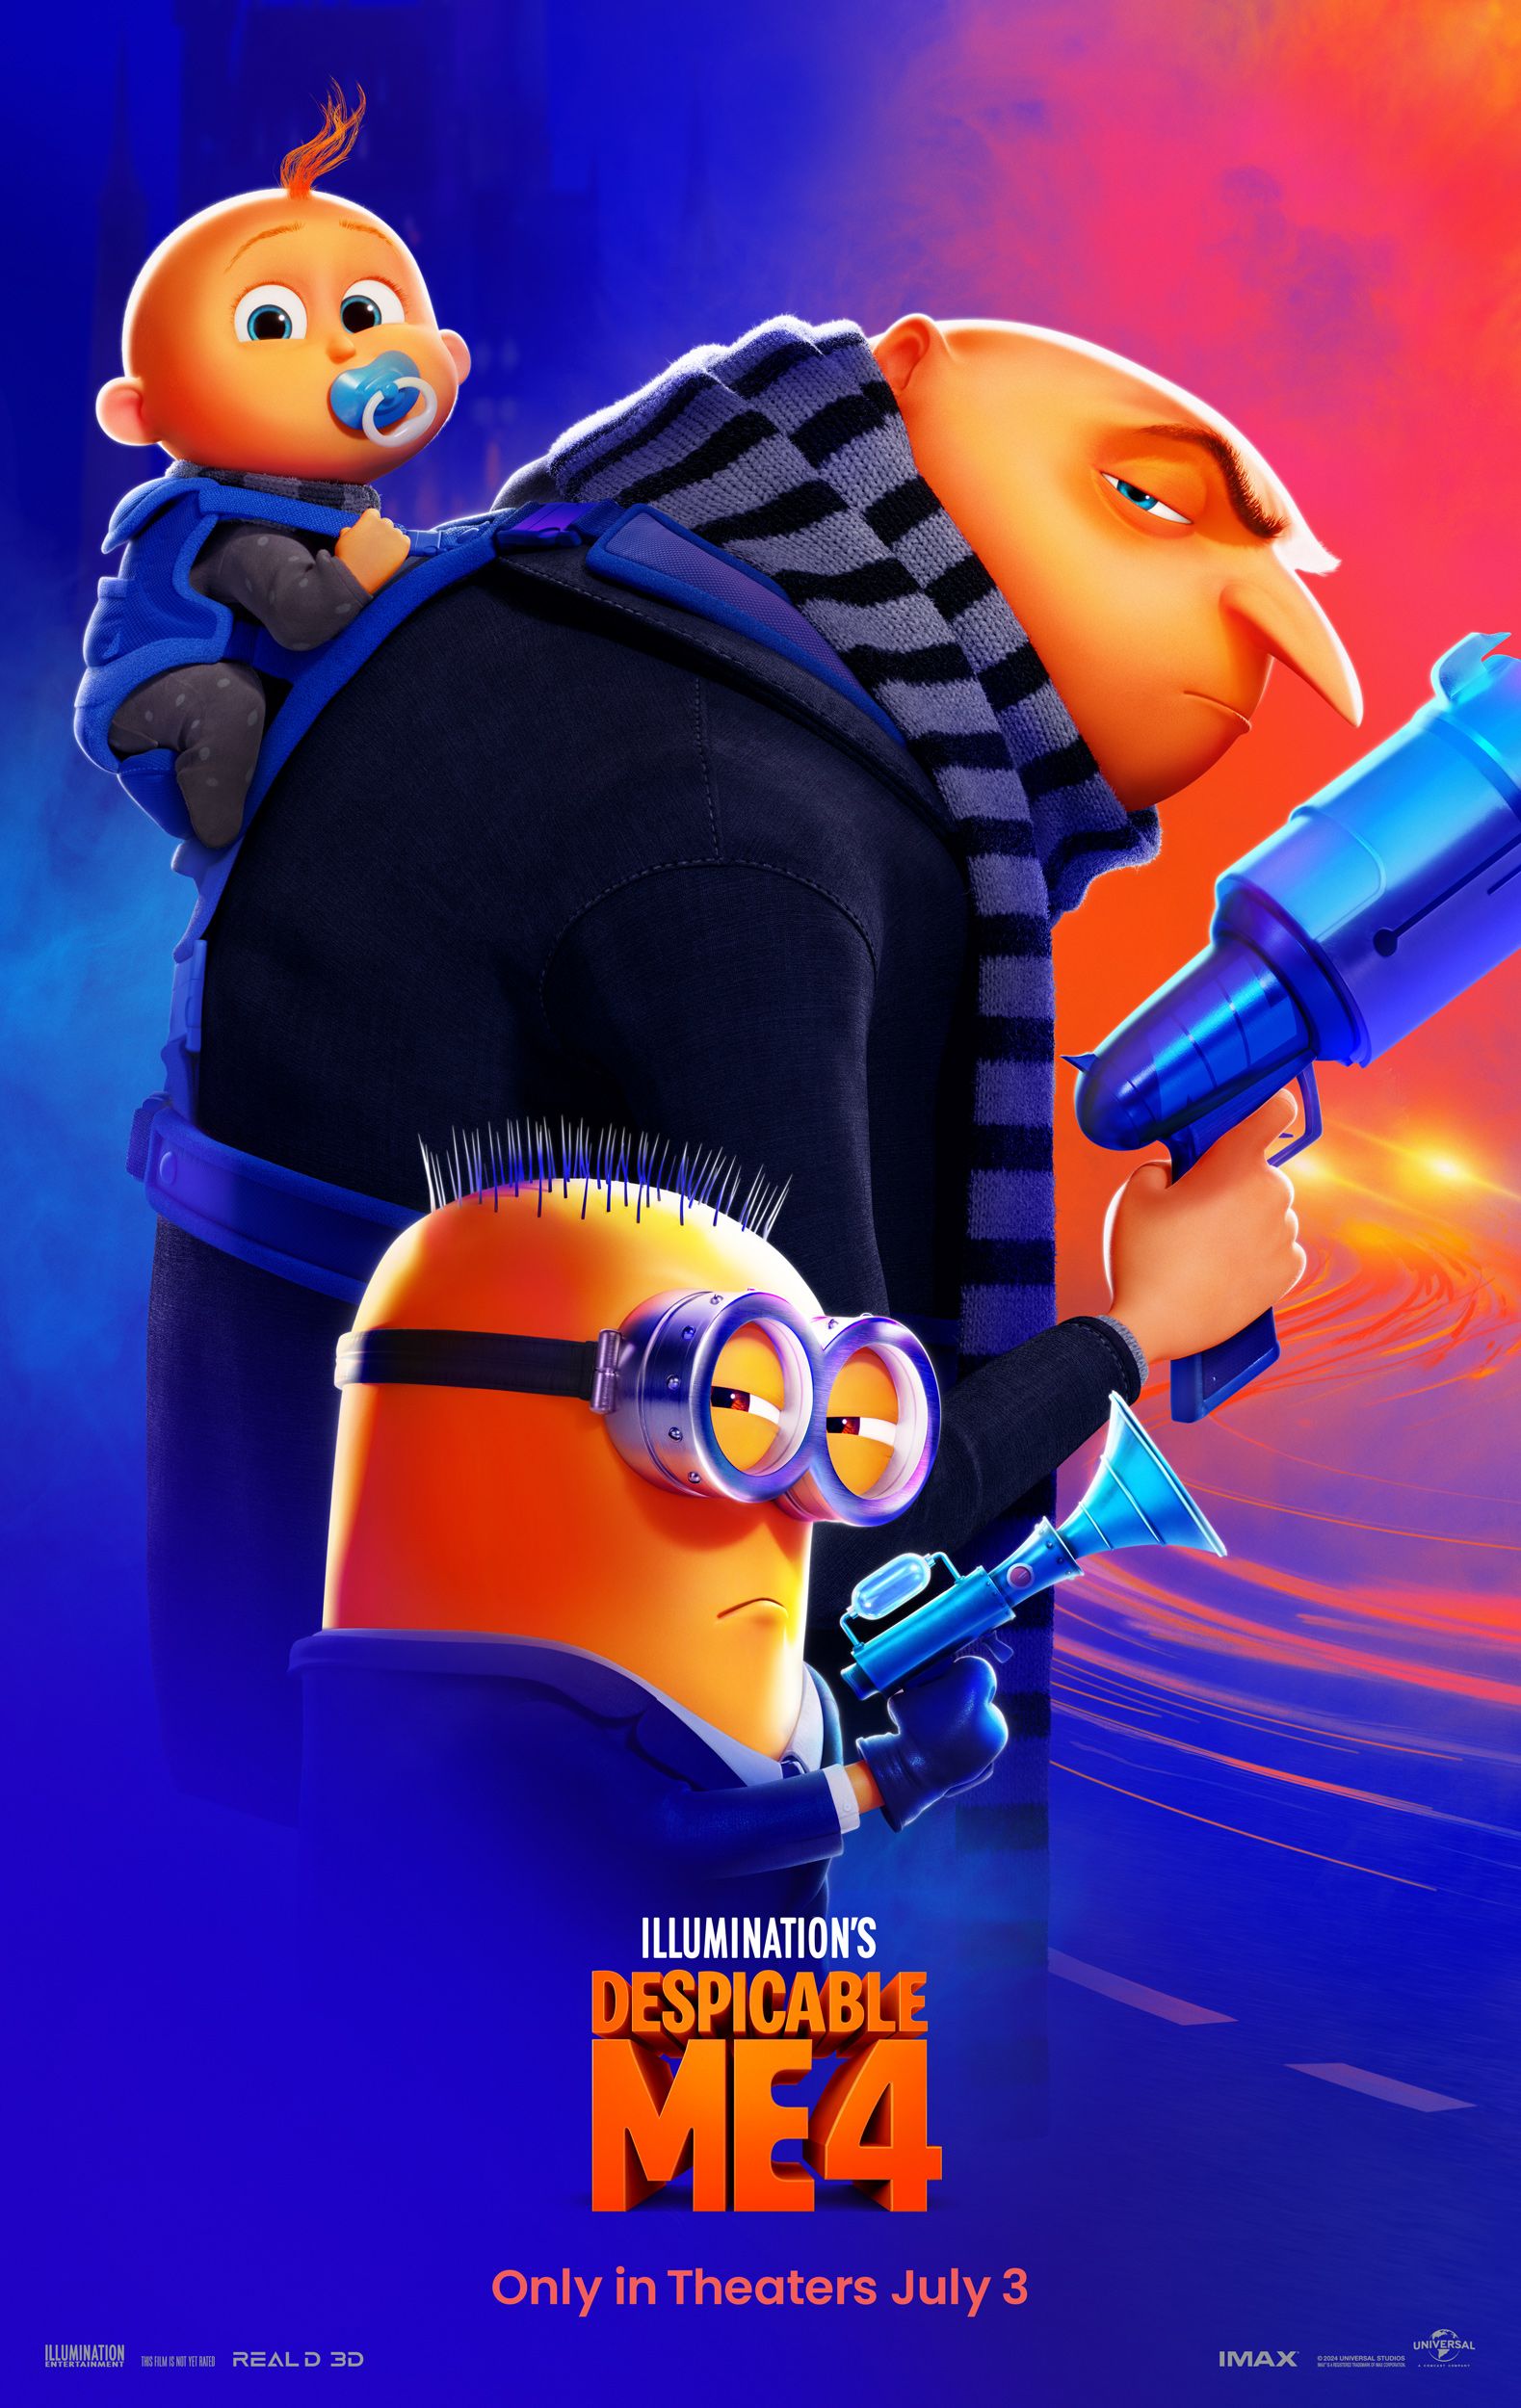 Despicable Me 4 Poster showing Gru with his son and a Minon holding a gun